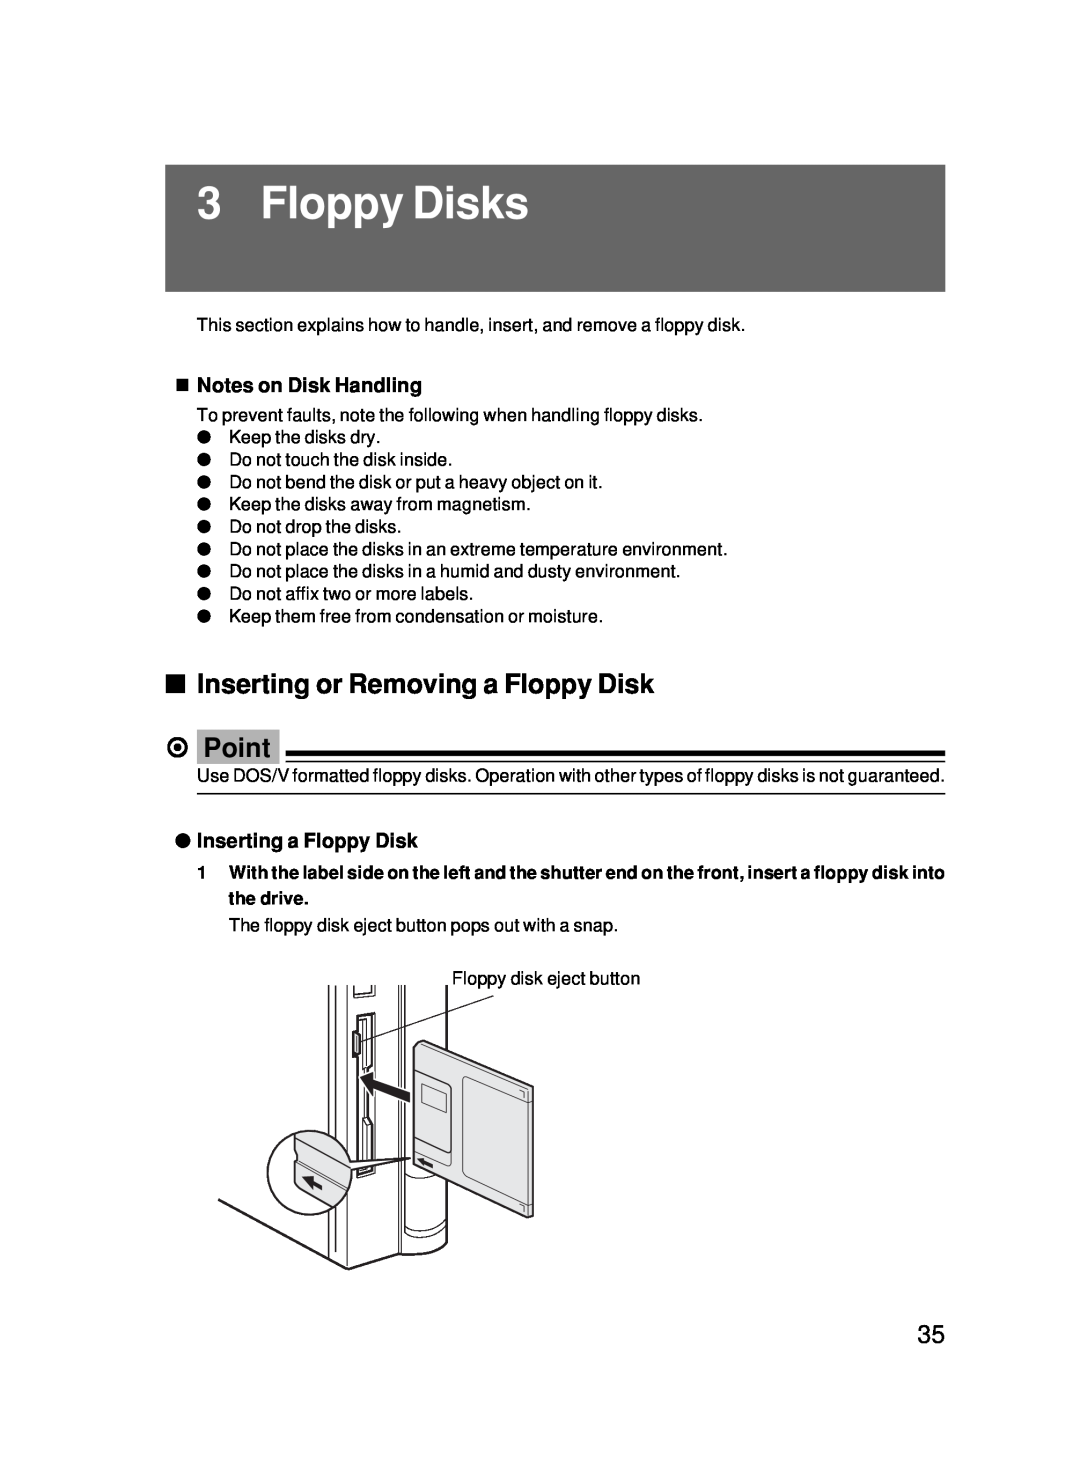 Fujitsu 5000 user manual Floppy Disks, Inserting or Removing a Floppy Disk Point 